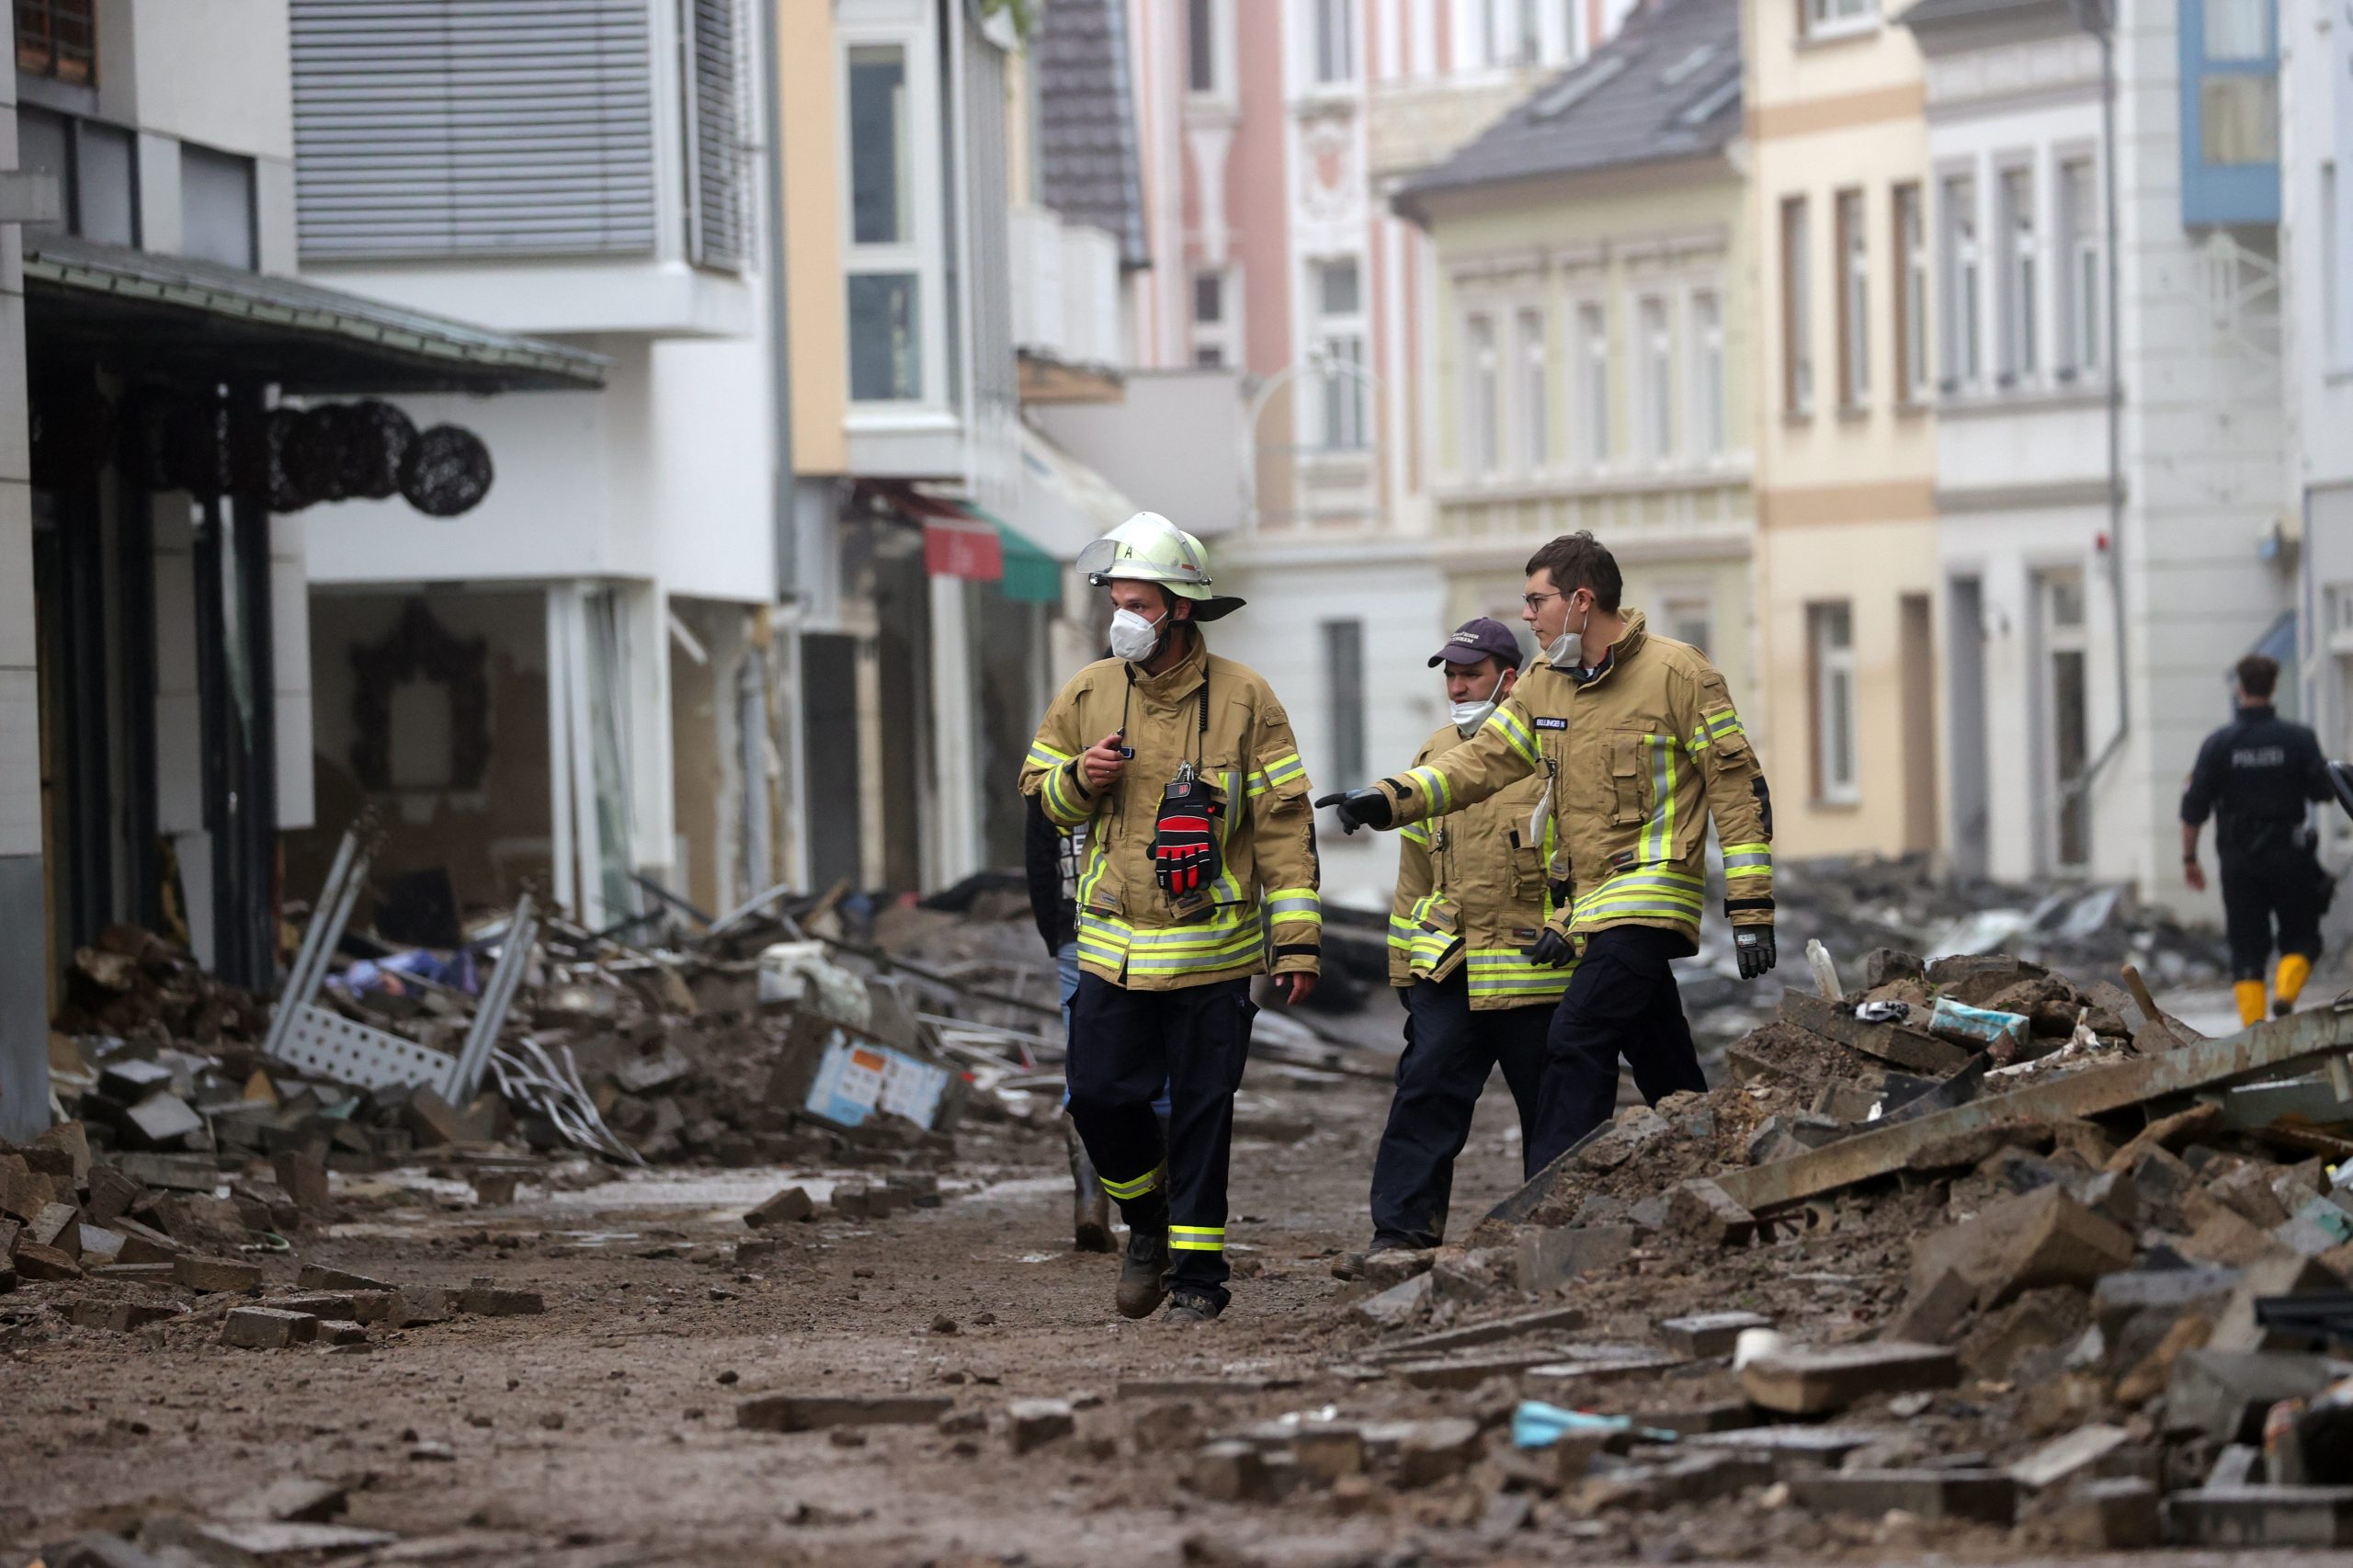 epa09347942 Members of the fire department (Feuerwehr) inspect a damaged area after flooding in Bad Neuenahr-Ahrweiler, Germany, 16 July 2021. Large parts of Western Germany were hit by heavy, continuous rain in the night to 15 July resulting in local flash floods that destroyed buildings and swept away cars.  EPA/FRIEDEMANN VOGEL